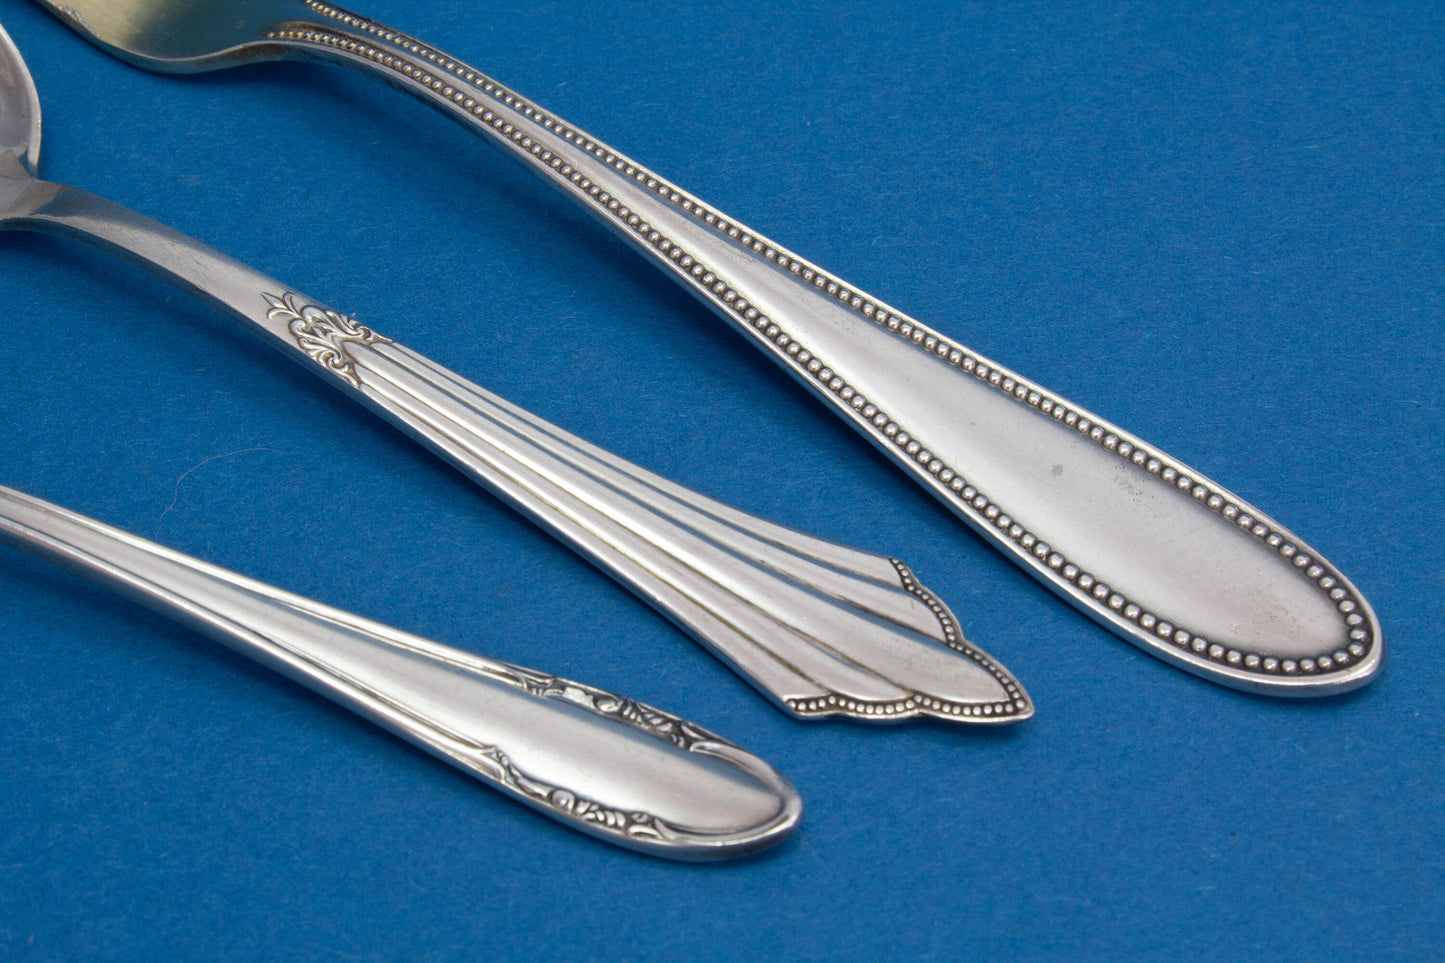 Cutlery set for coffee and cake, silver plated, teaspoon, cake fork, mocha spoon